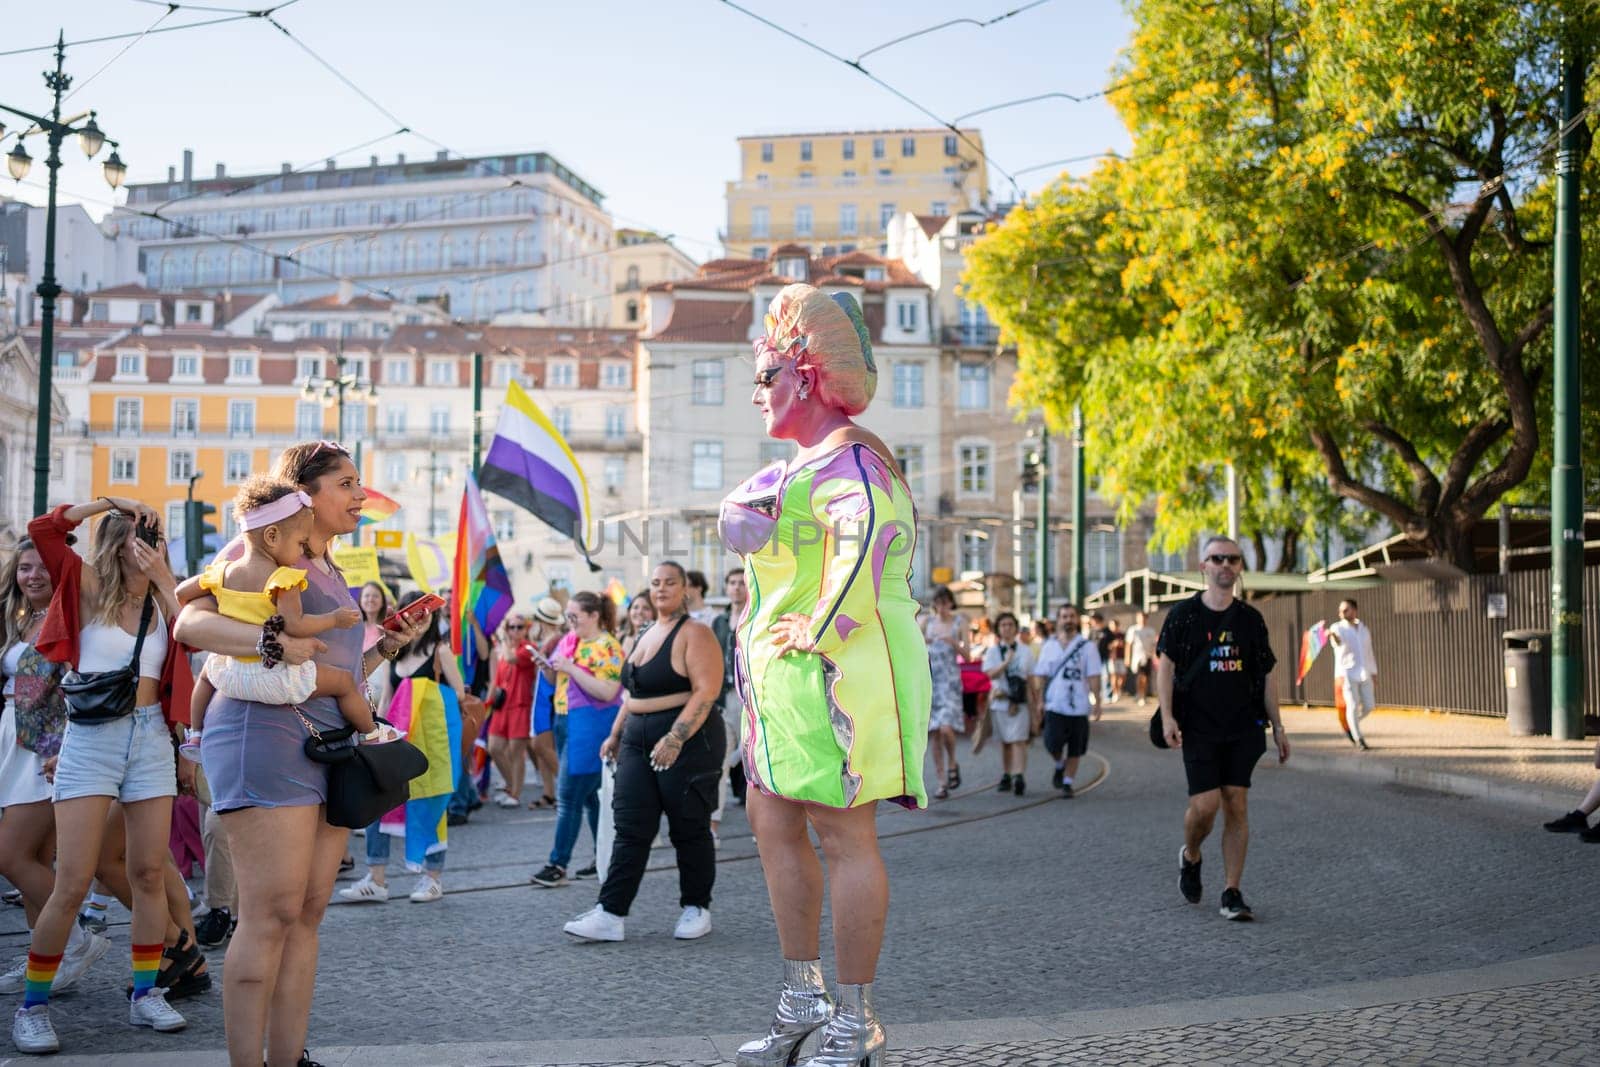 Lisbon, Portugal. 17 June 2023 Drag queen at Pride Parade in brightly colored costume. European drag queen in wig and makeup walking promenade. Respect, sexual equality, pride LGBT people